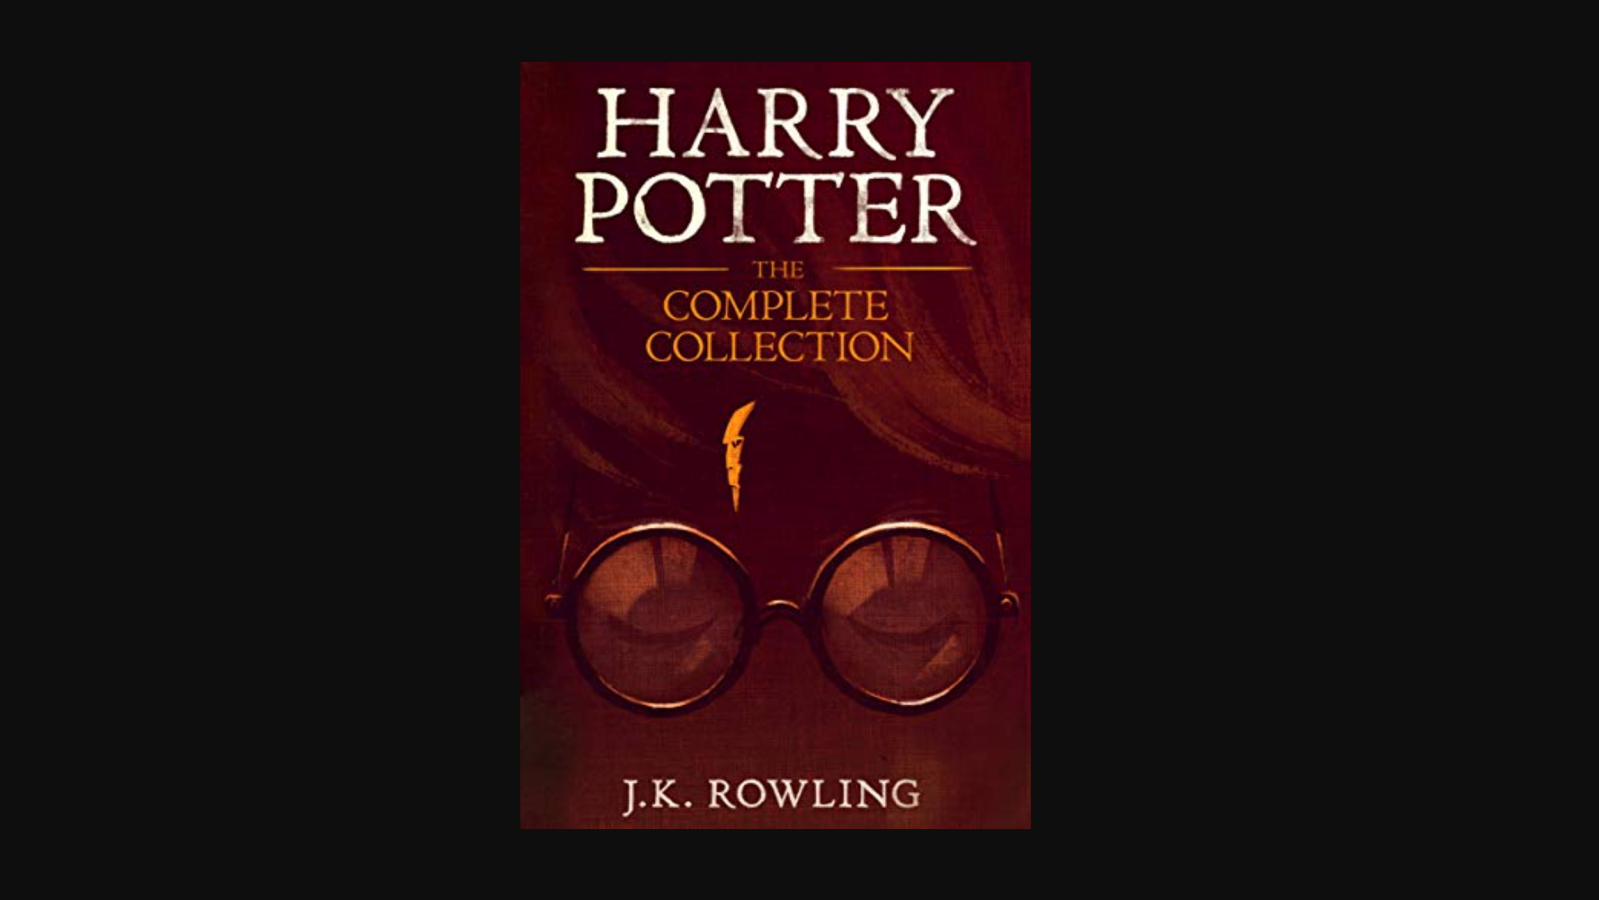 Can I read the Harry Potter books on my smartphone with the Kindle app? 2